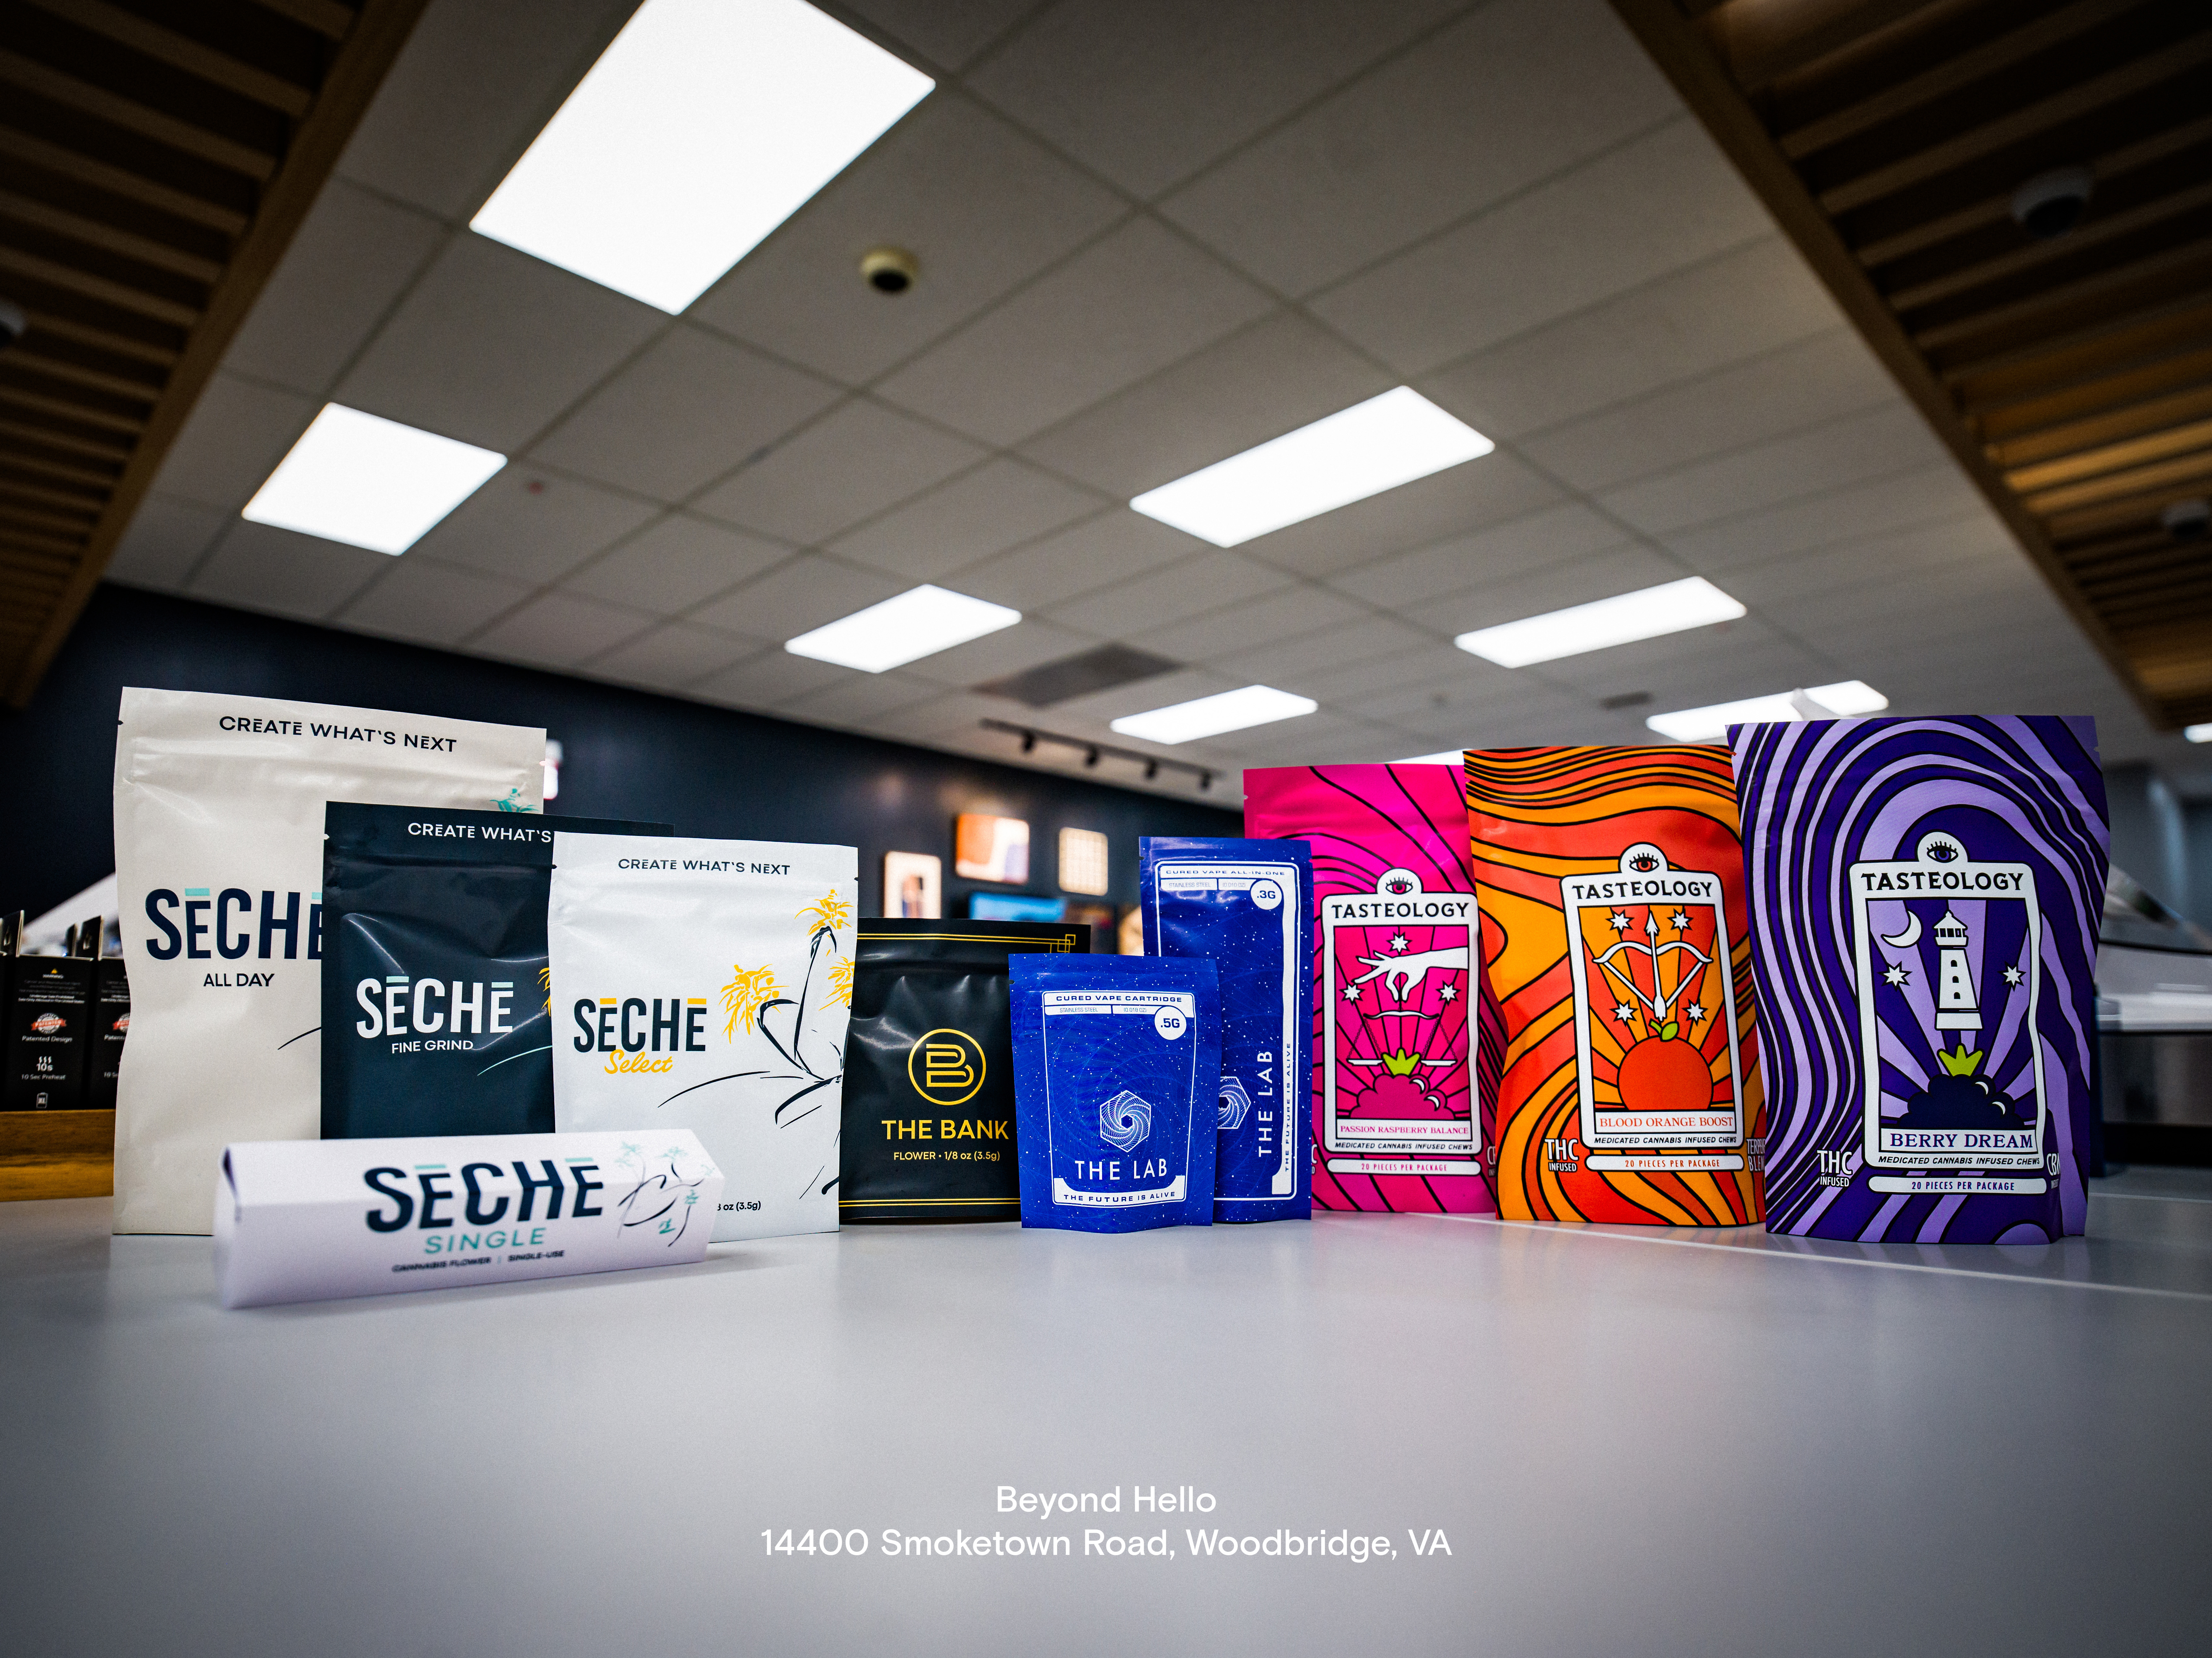 Beyond Hello™ Woodbridge patients will also have access to five of Jushi’s in-house brands, including Sèchè,  The Bank, Tasteology Fruit Chews, The Lab, and Nira + Medicinals – all locally grown at Jushi’s nearby grower-processor facility in Manassas.